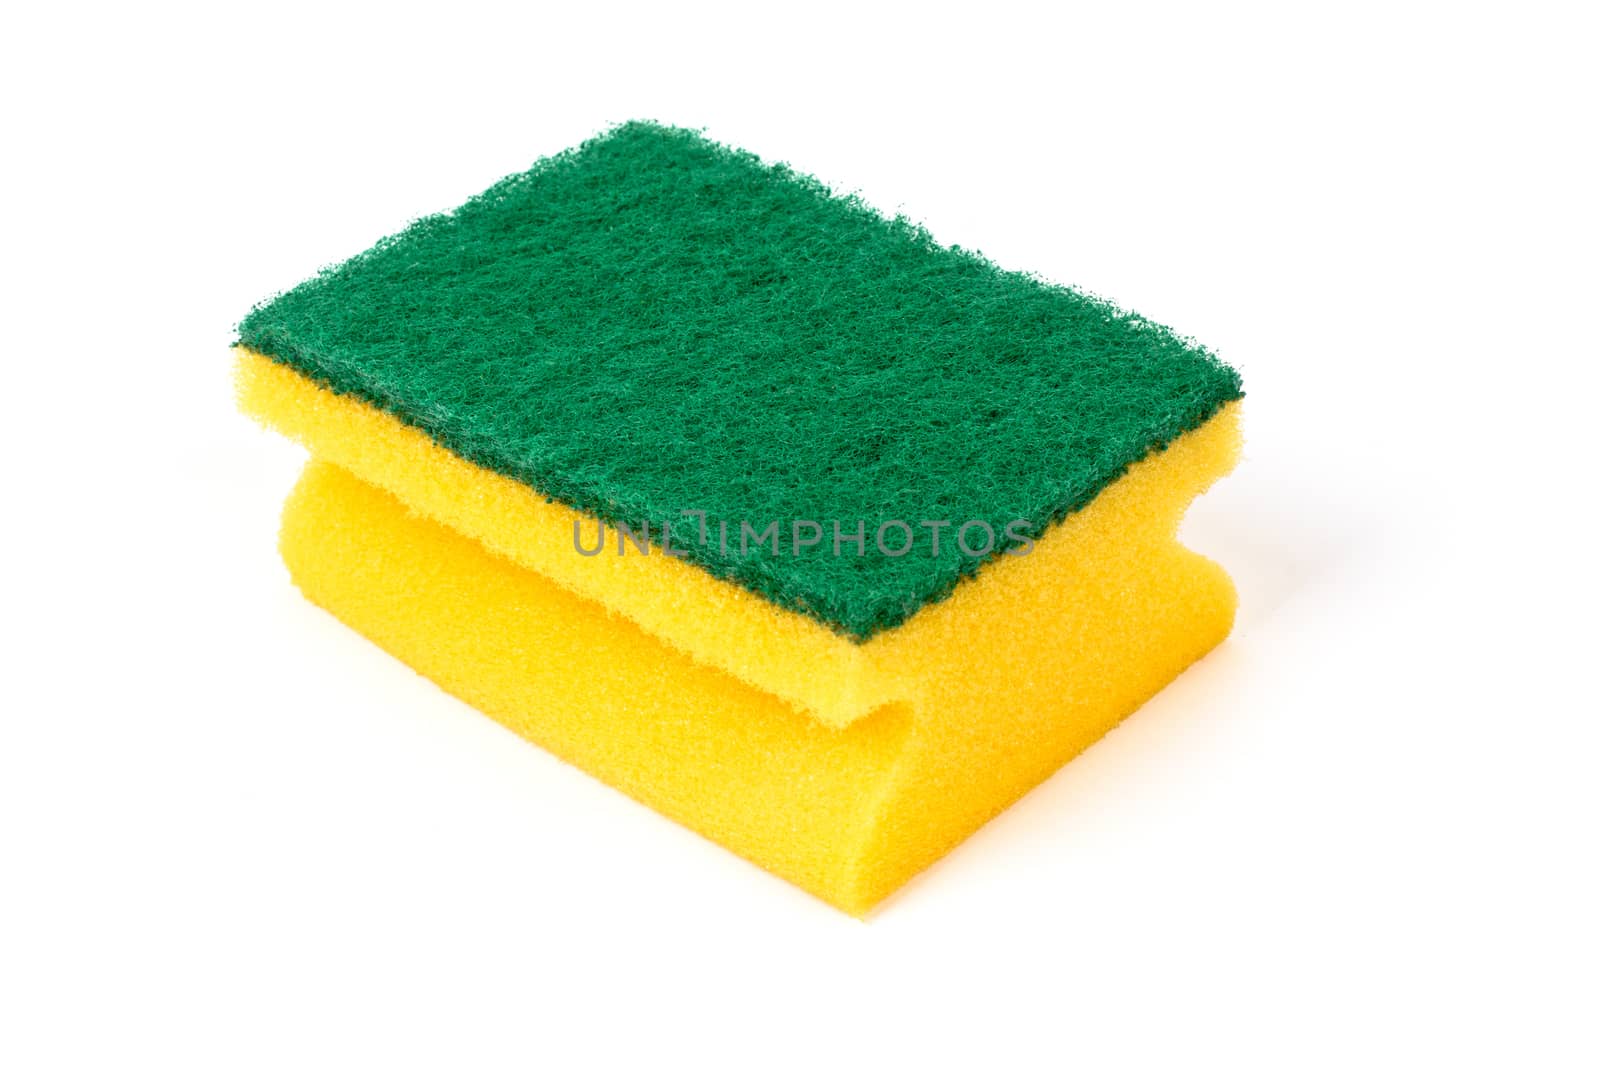 A kitchen sponge isolated against white background